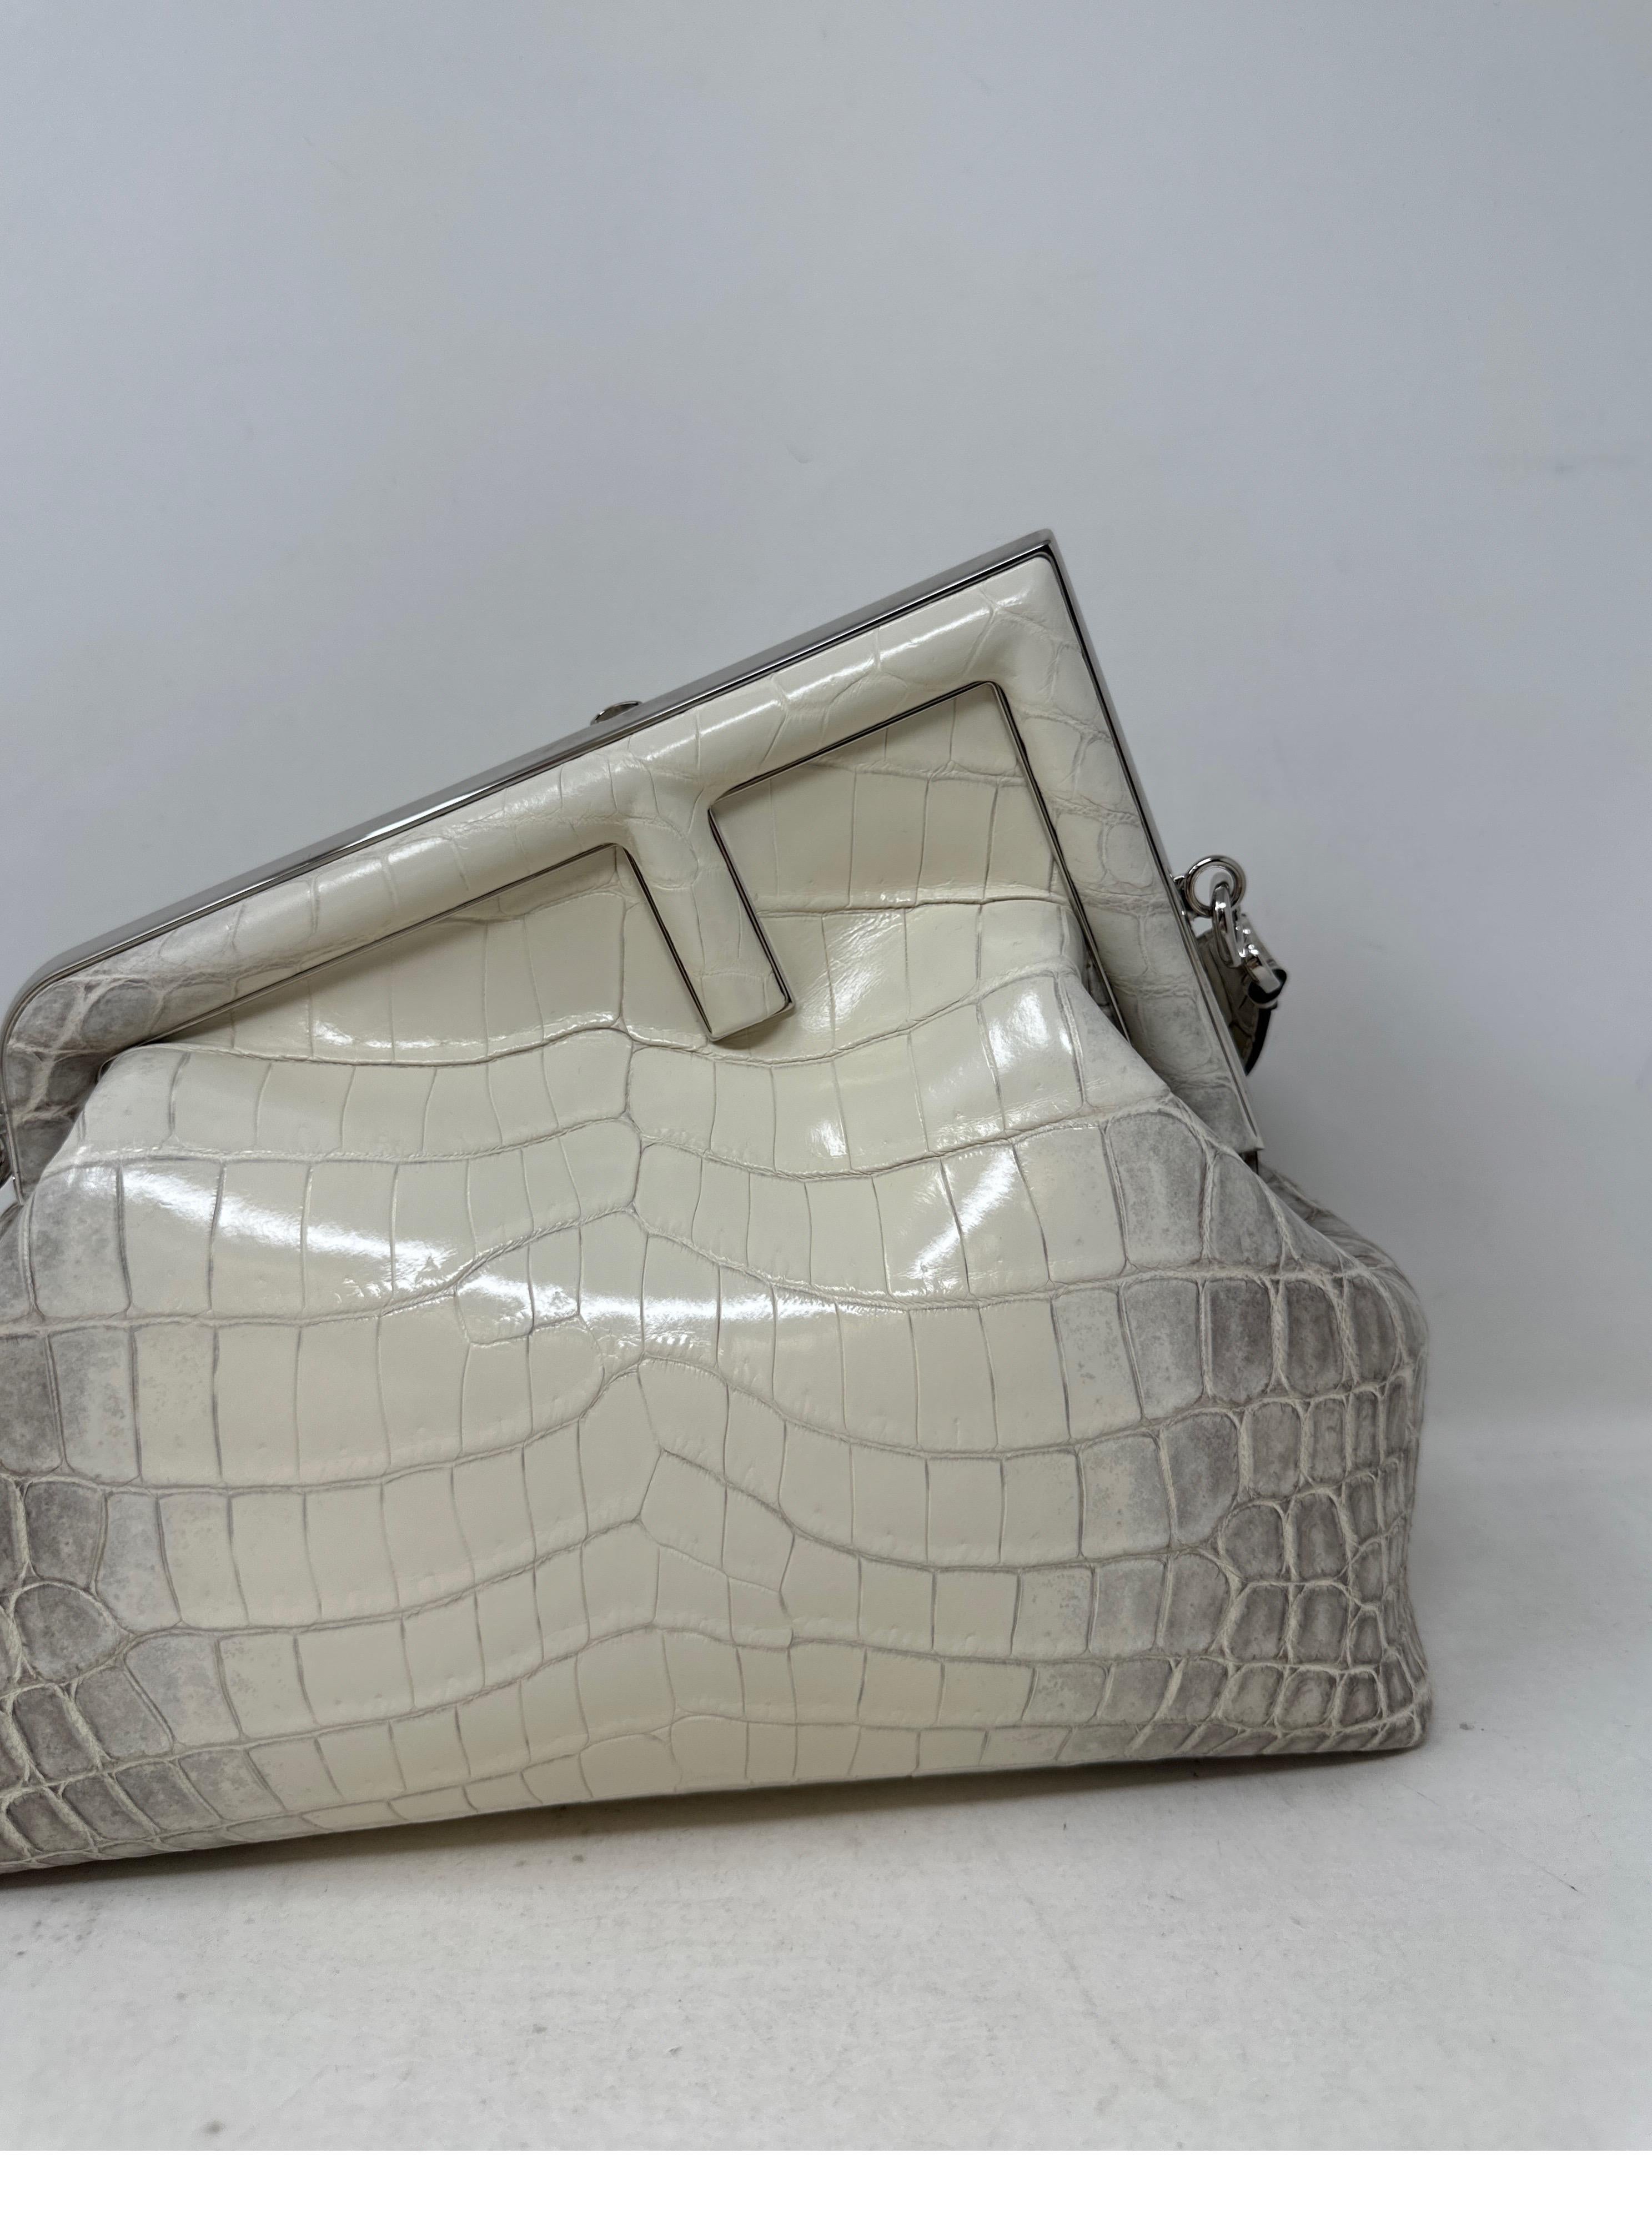 Fendi Medium size First Bag. Made of exotic natural crocodile leather painted white. Interior is lined in soft nappa leather. Palladium silver hardware details. The strap can be taken off and the bag can be worn as a clutch. Oversized F clasp adorns